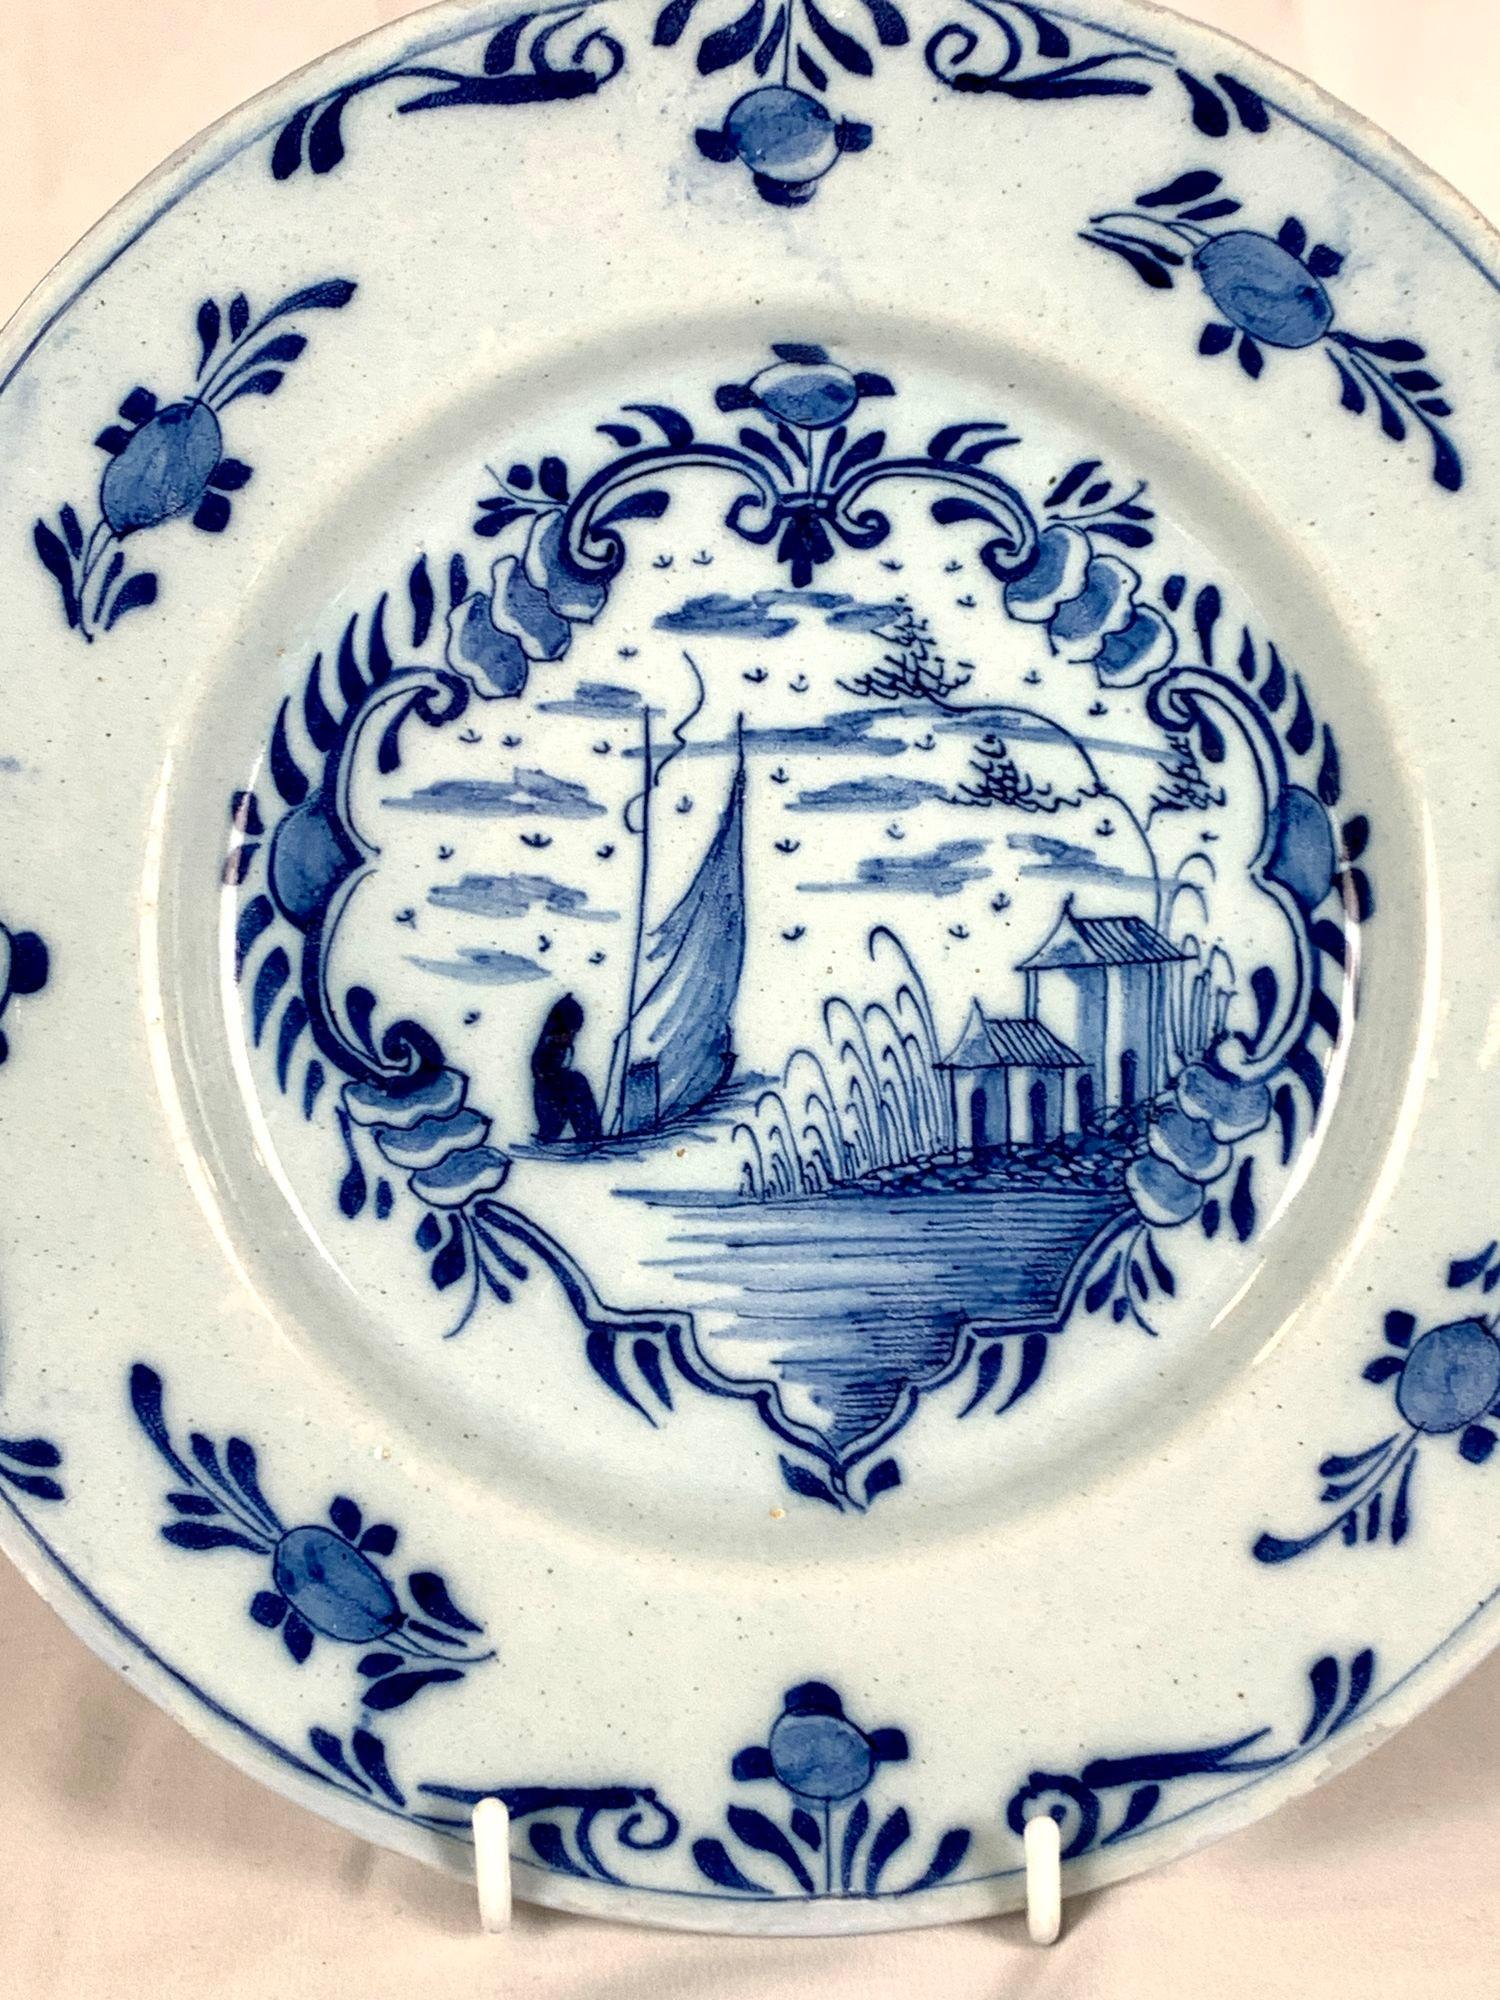 This hand painted blue and white dish was made in Delft, The Netherlands, circa 1770.
The center scene is painted within a decorative cartouche.
We see a fisherman on a sailboat moving away from the viewer and out to sea.
The wide border is